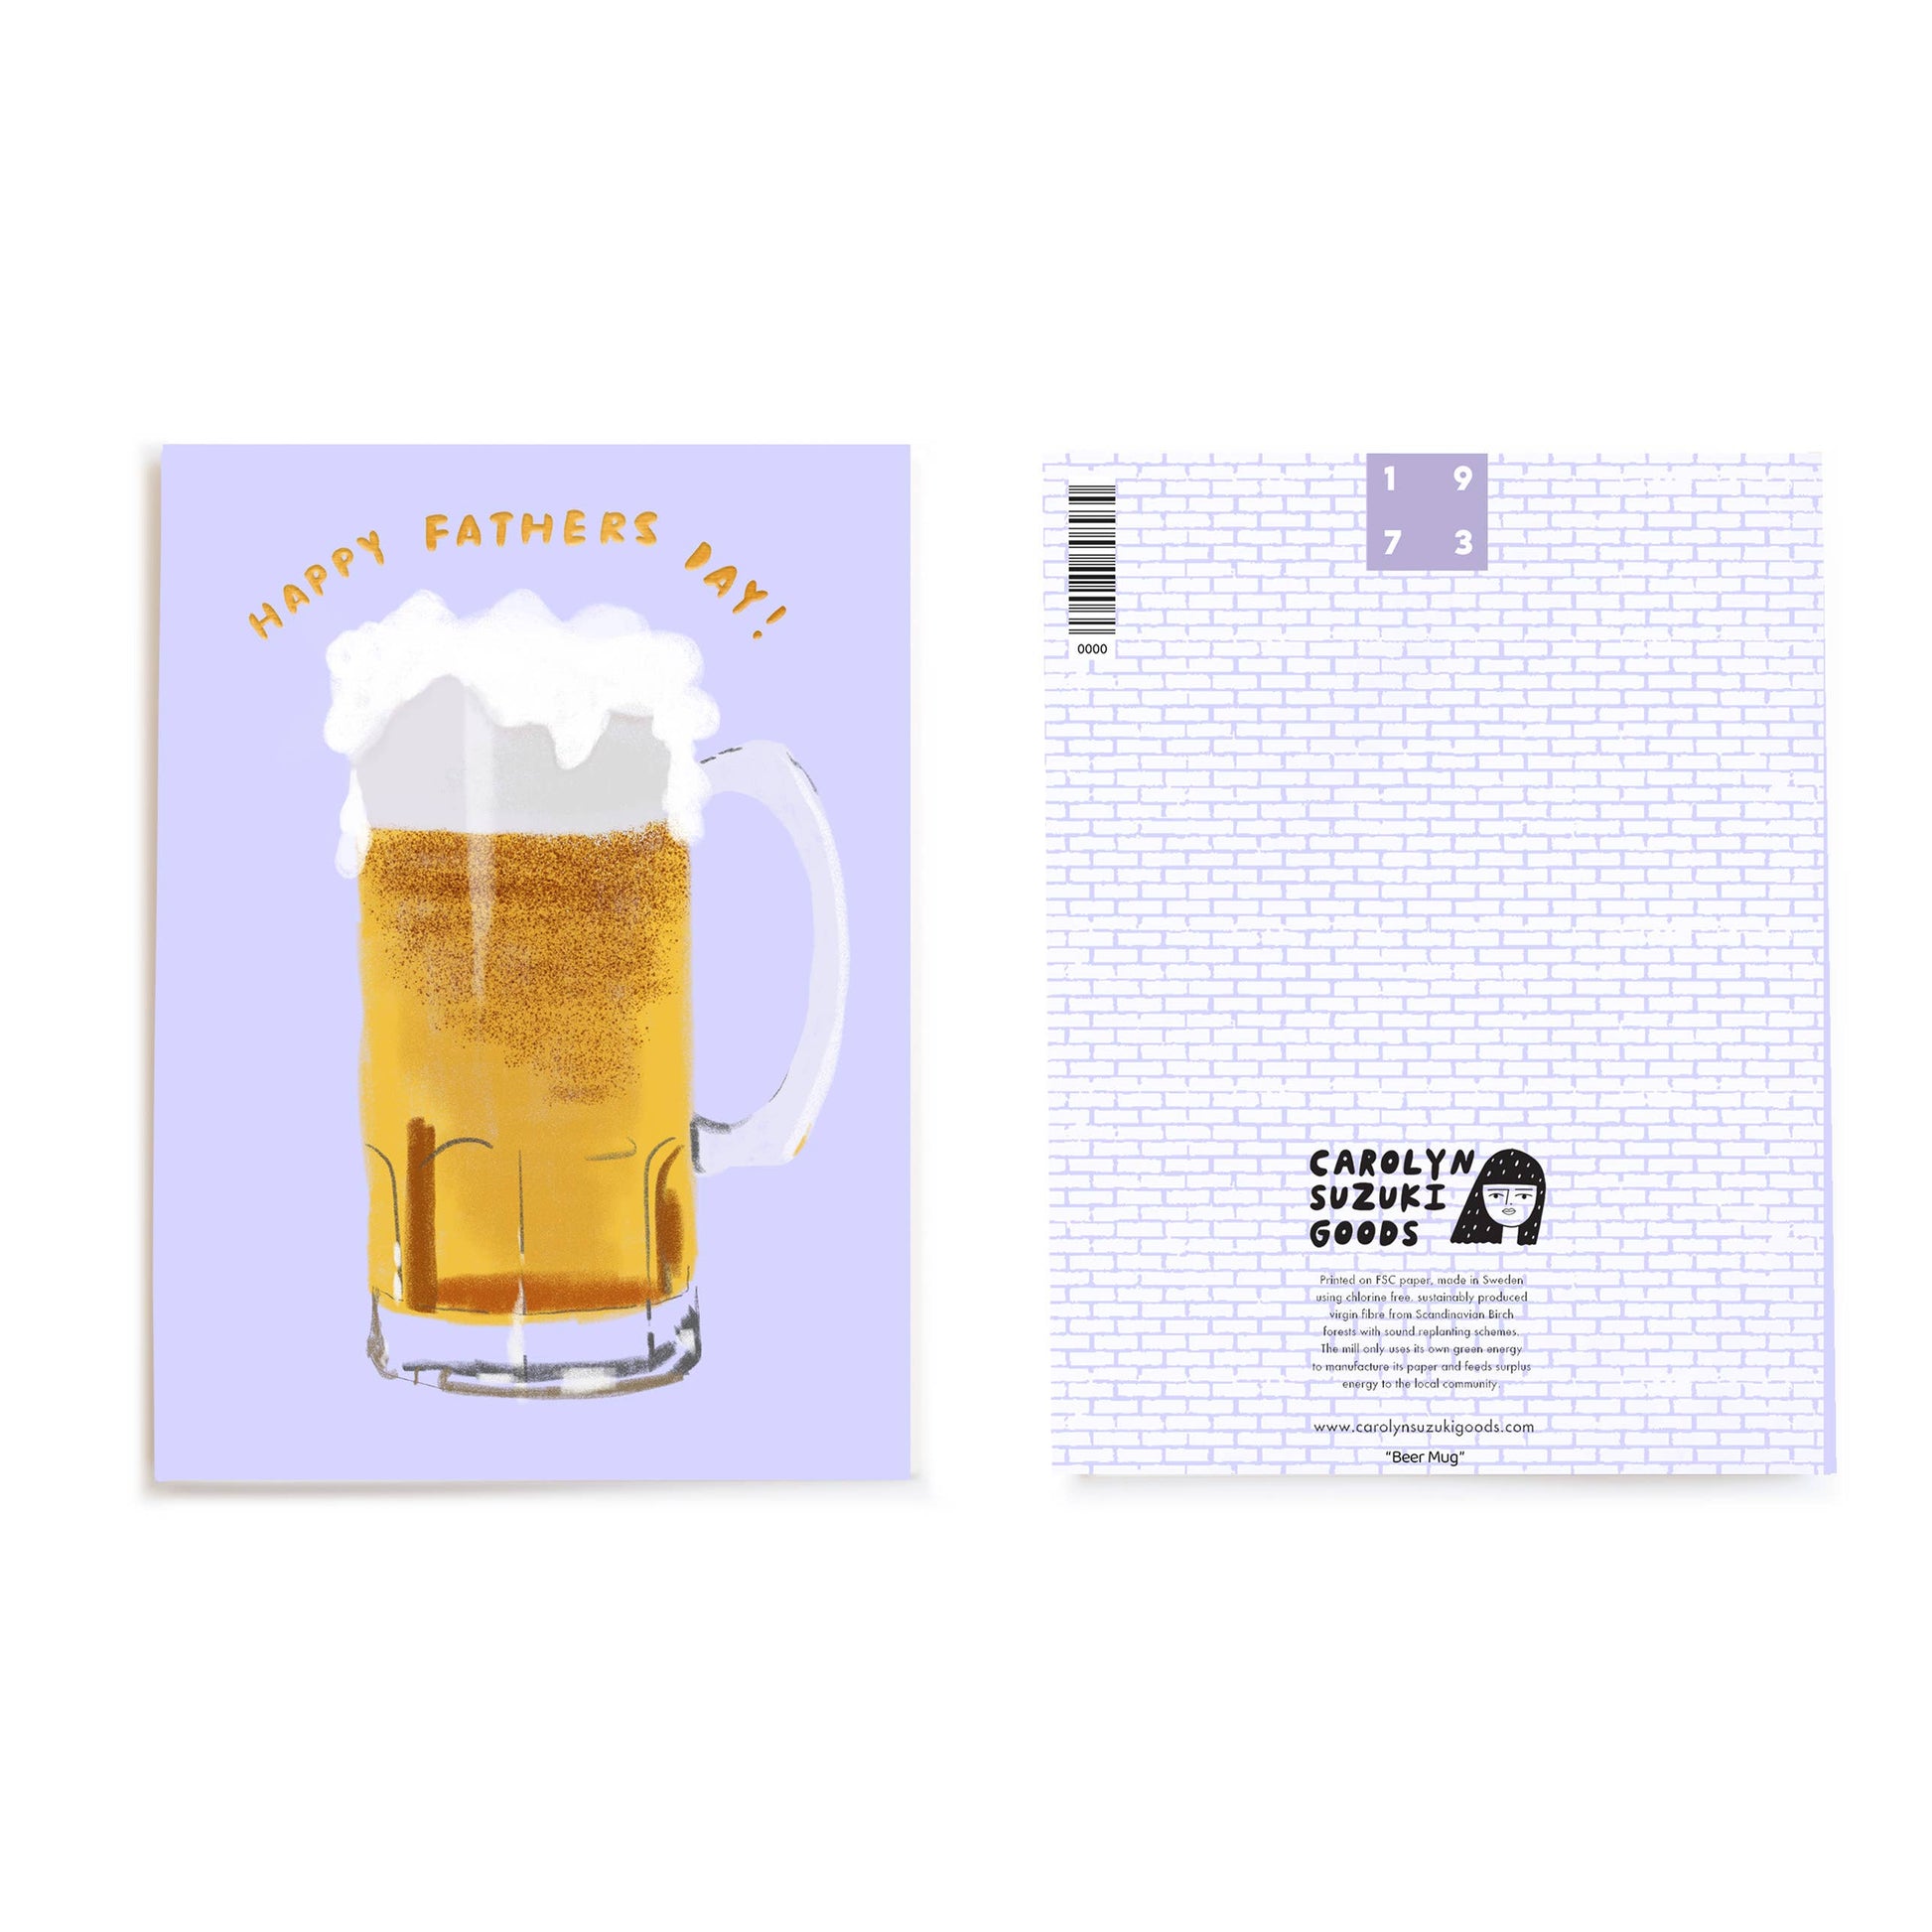 Imagery showing both front and back designs of the beer mug father's day card. Back just has a white and blue brick pattern design on it. 